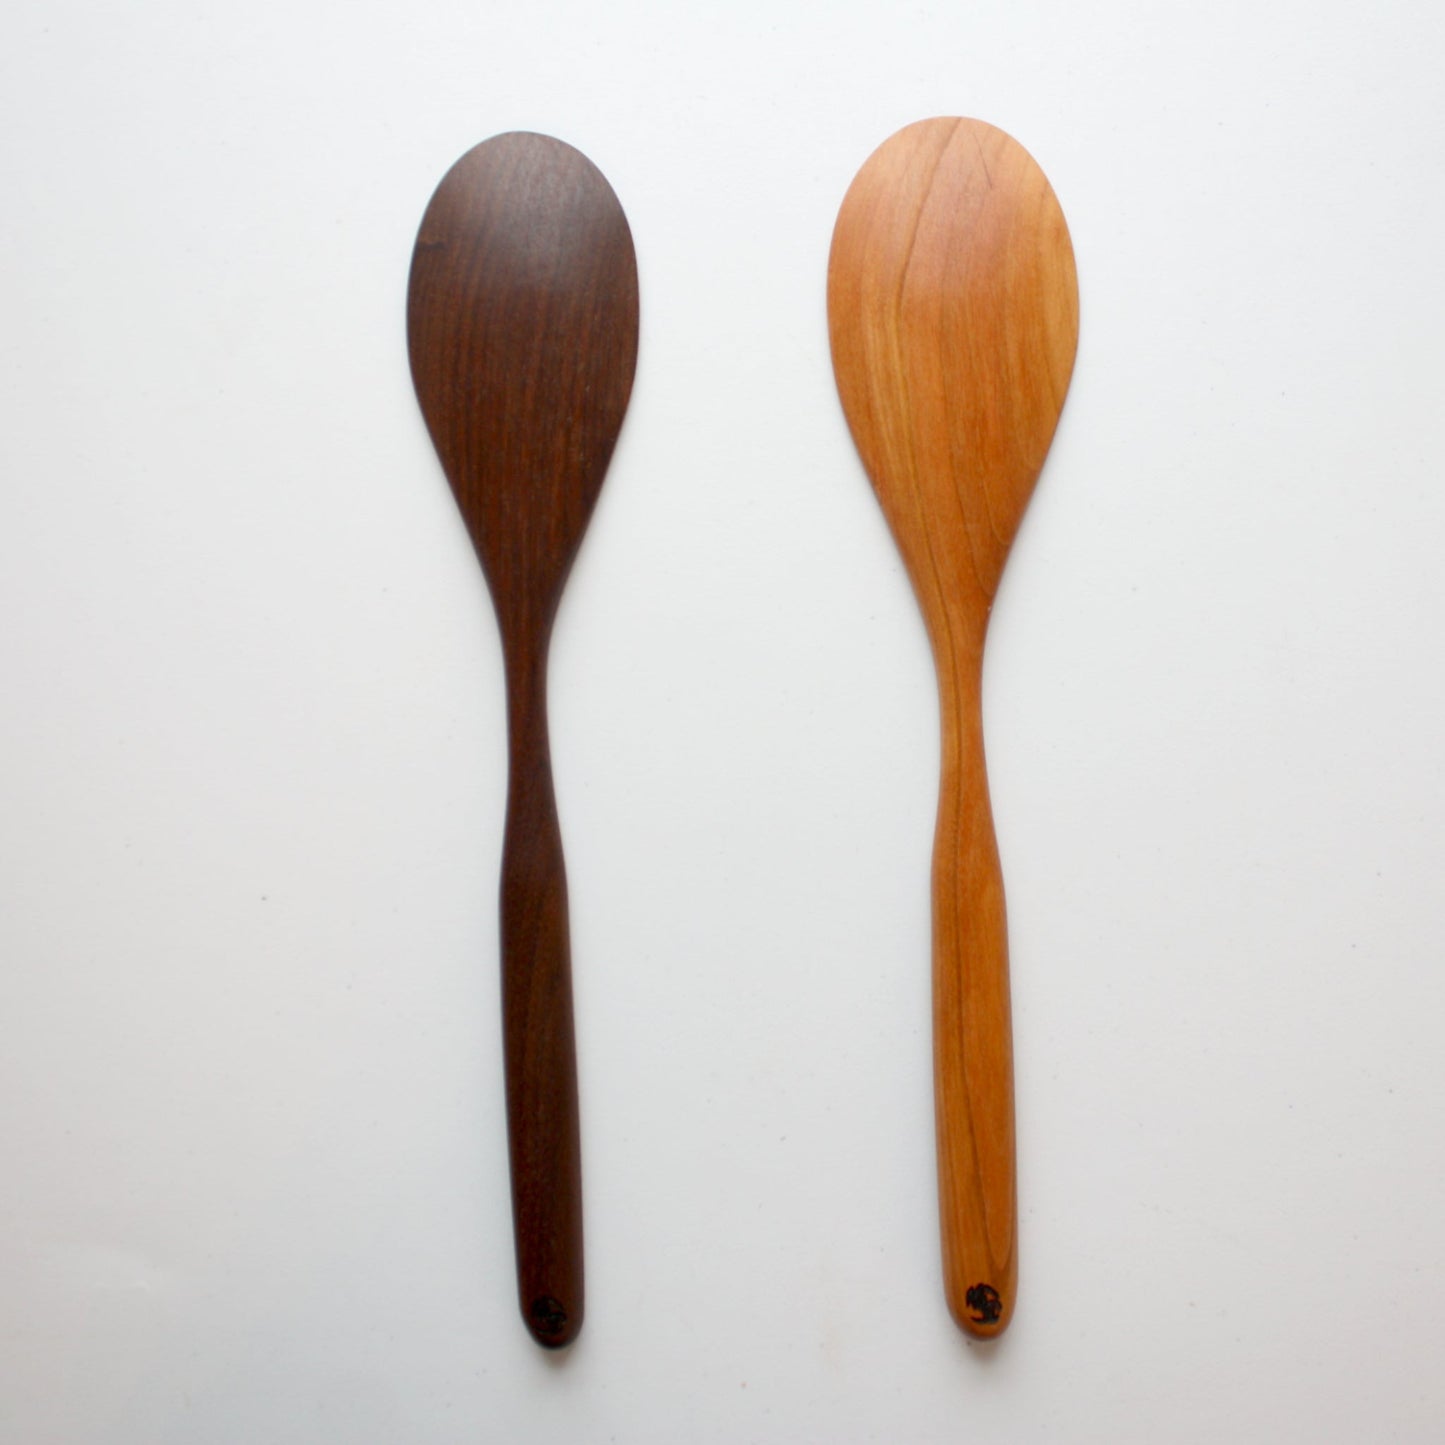 Wood Cooking and Serving Spoon - Made in the USA